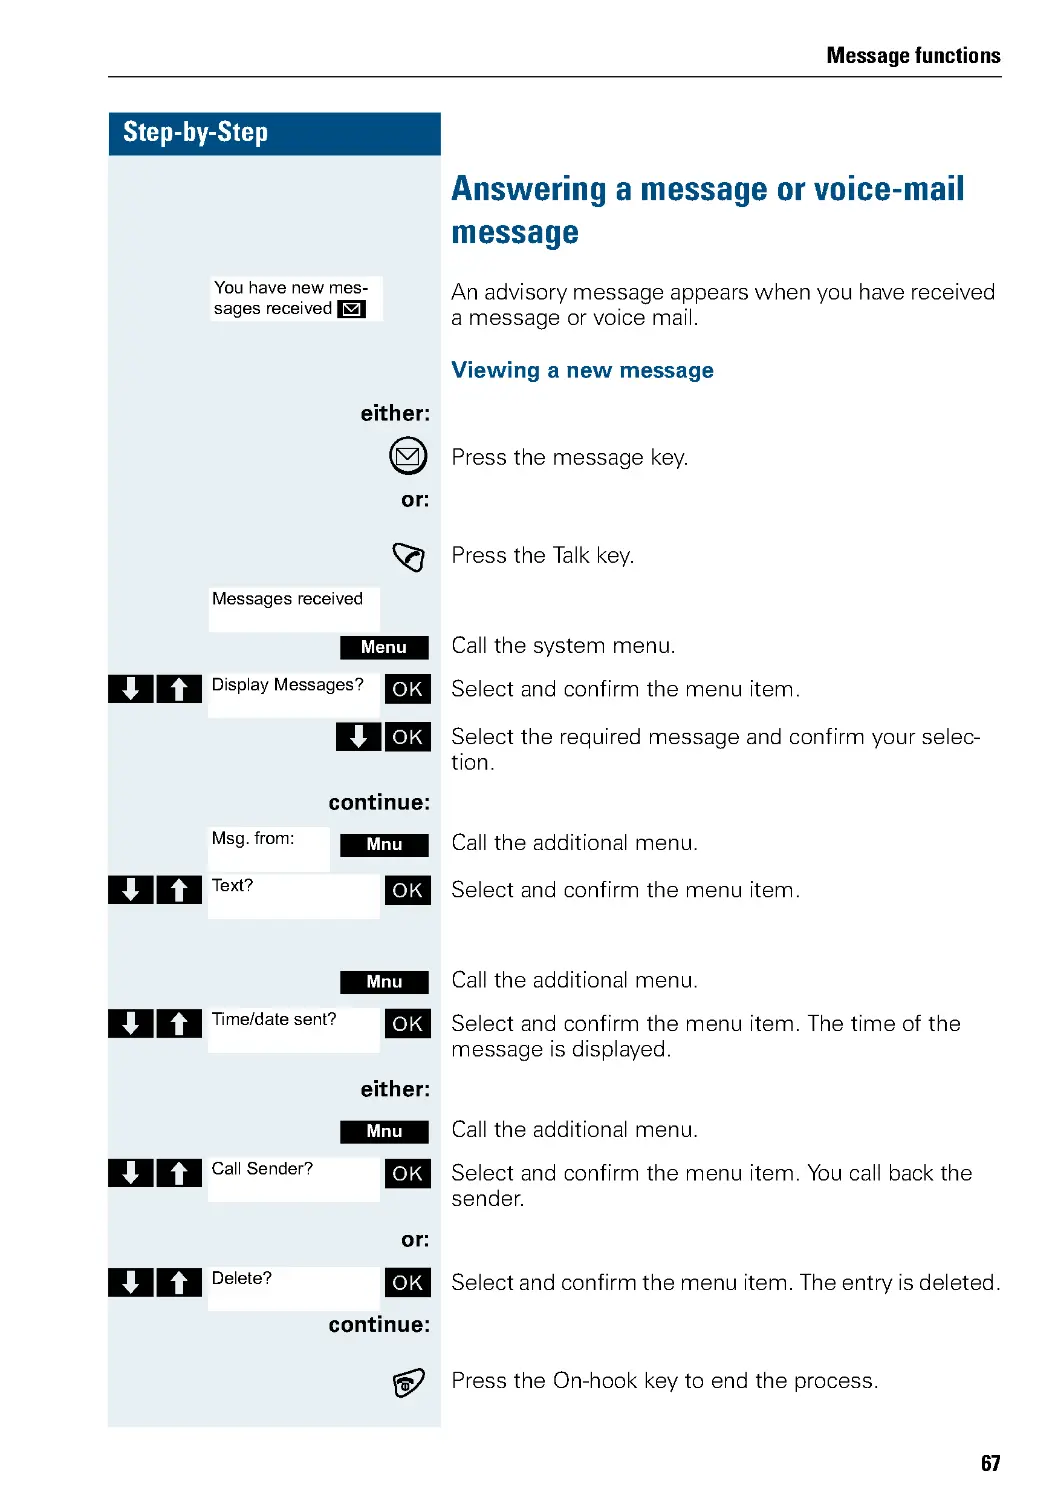 Answering a message or voice-mail message